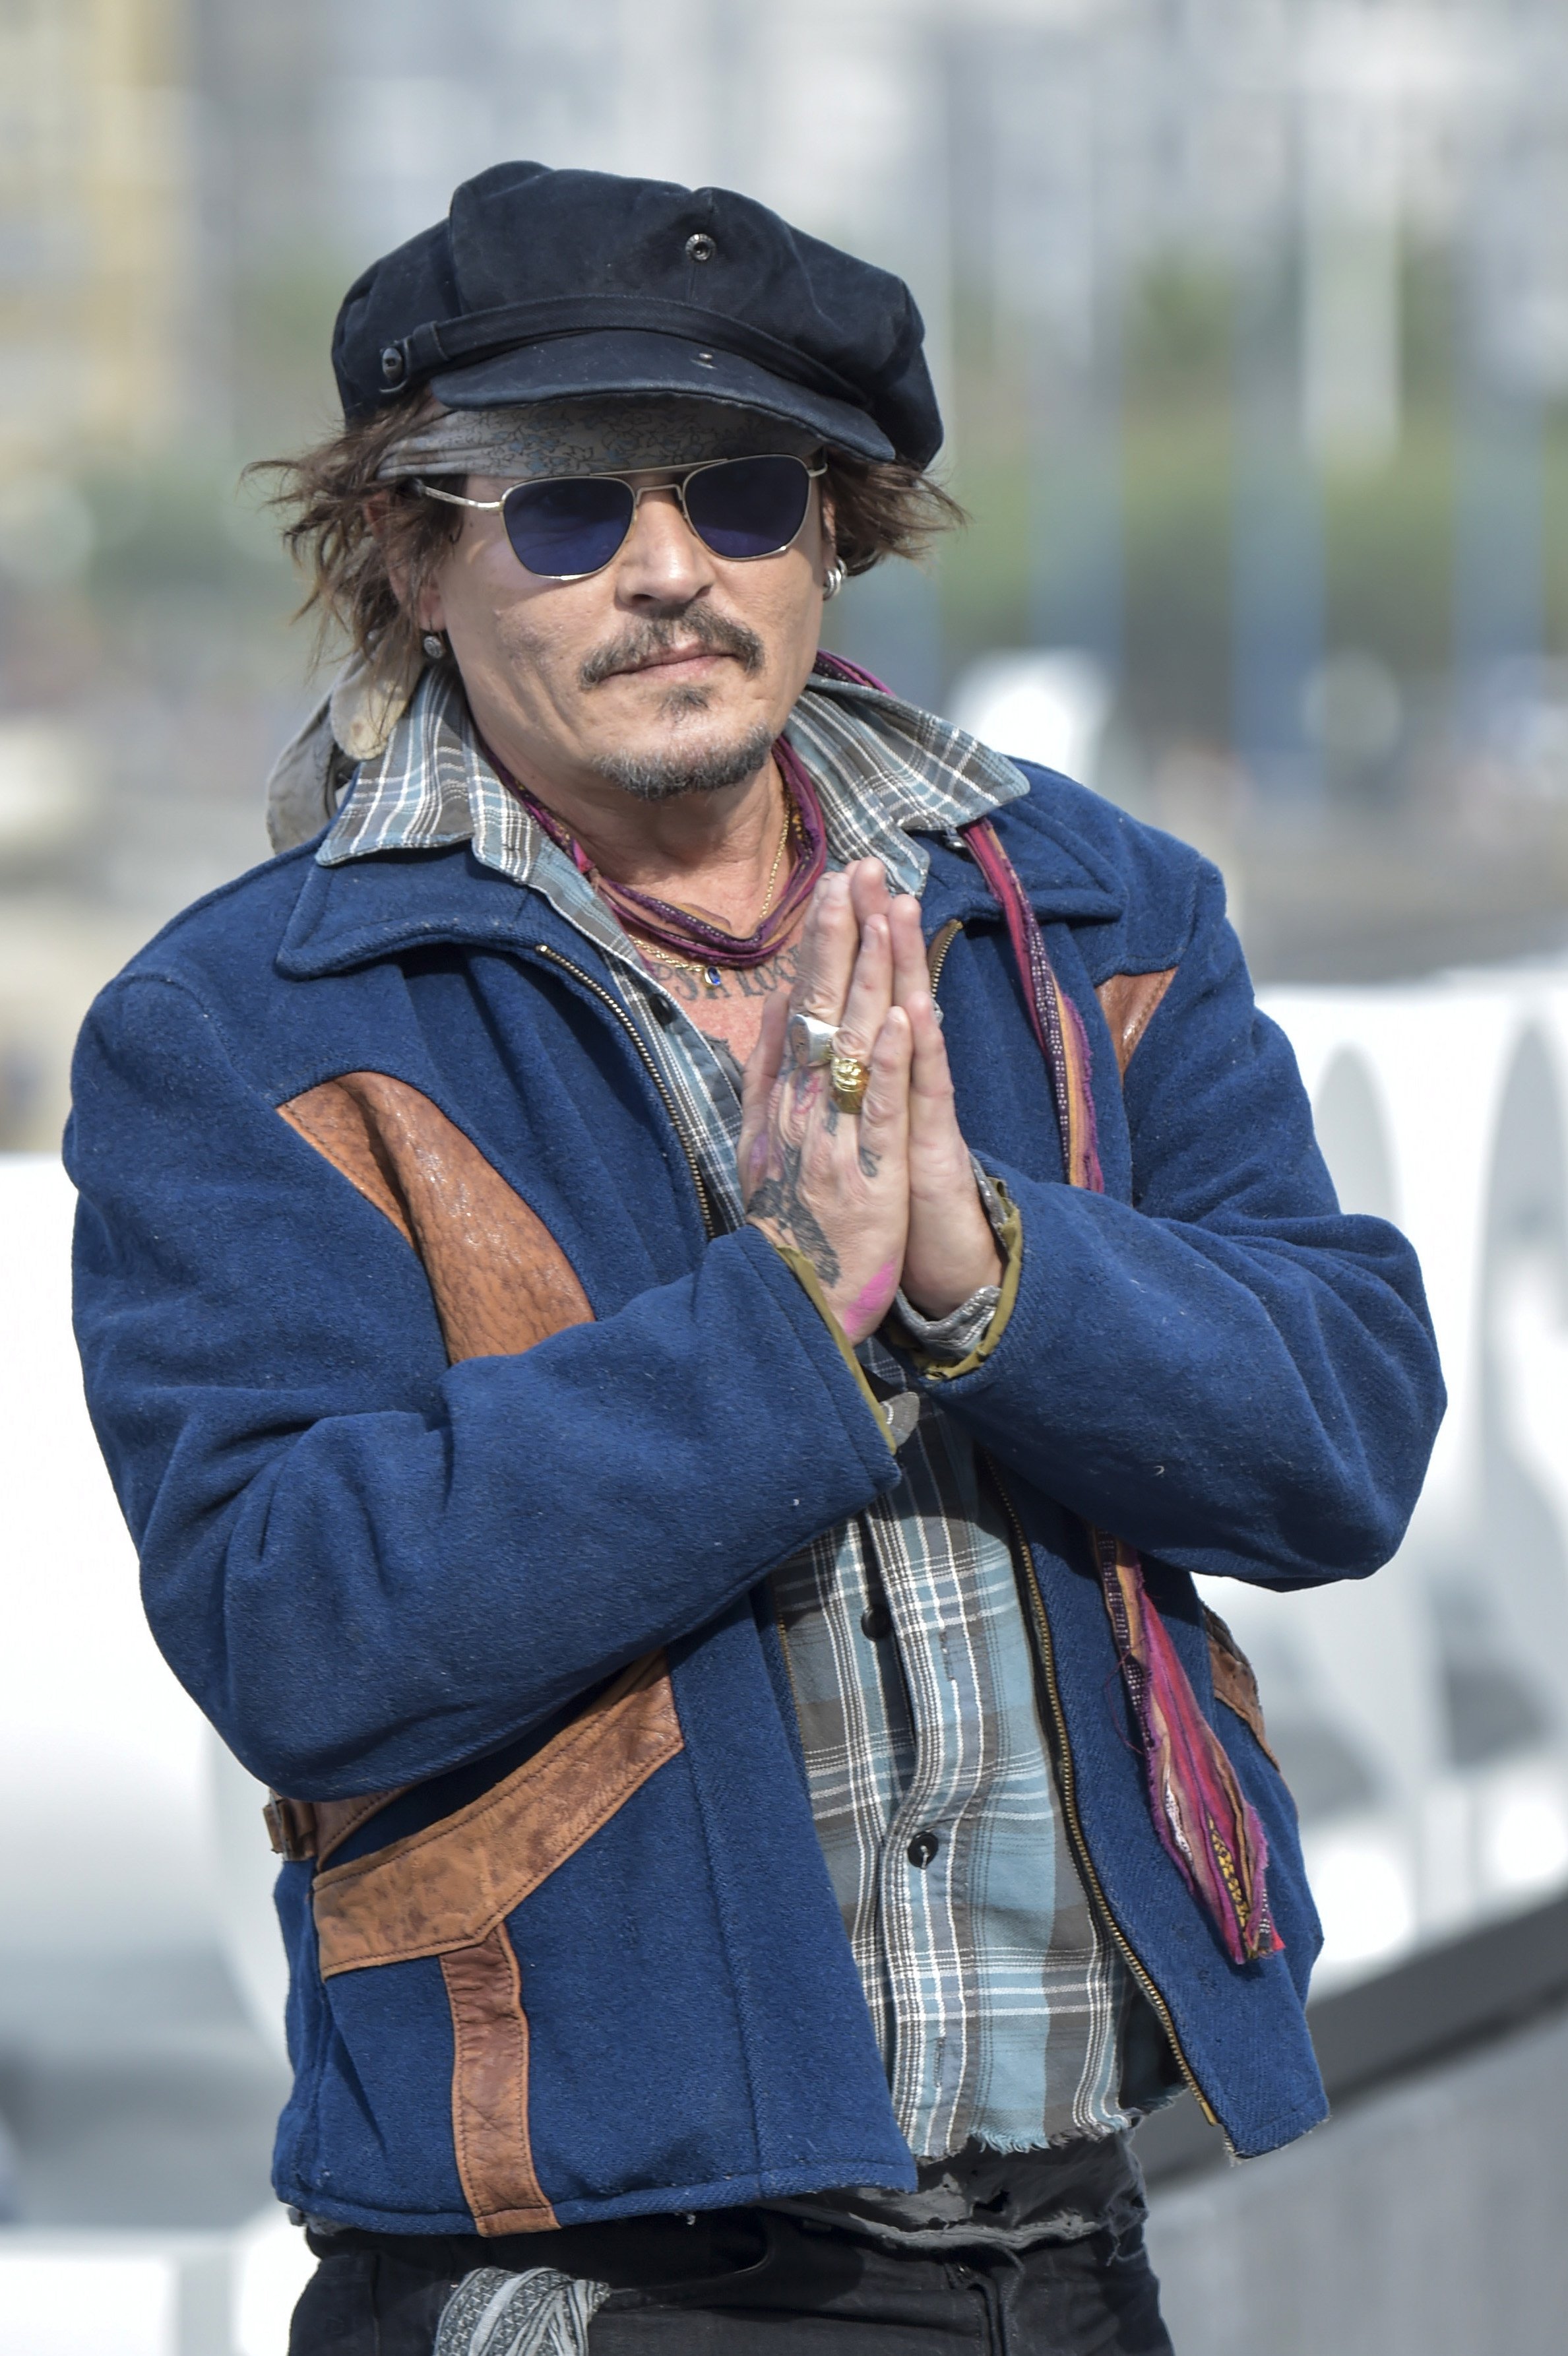 Johnny Depp attends the Donostia Award photocall during 69th San Sebastian Film Festival at Kursaal, San Sebastian, on September 22, 2021, in San Sebastian, Spain. | Source: Getty Images